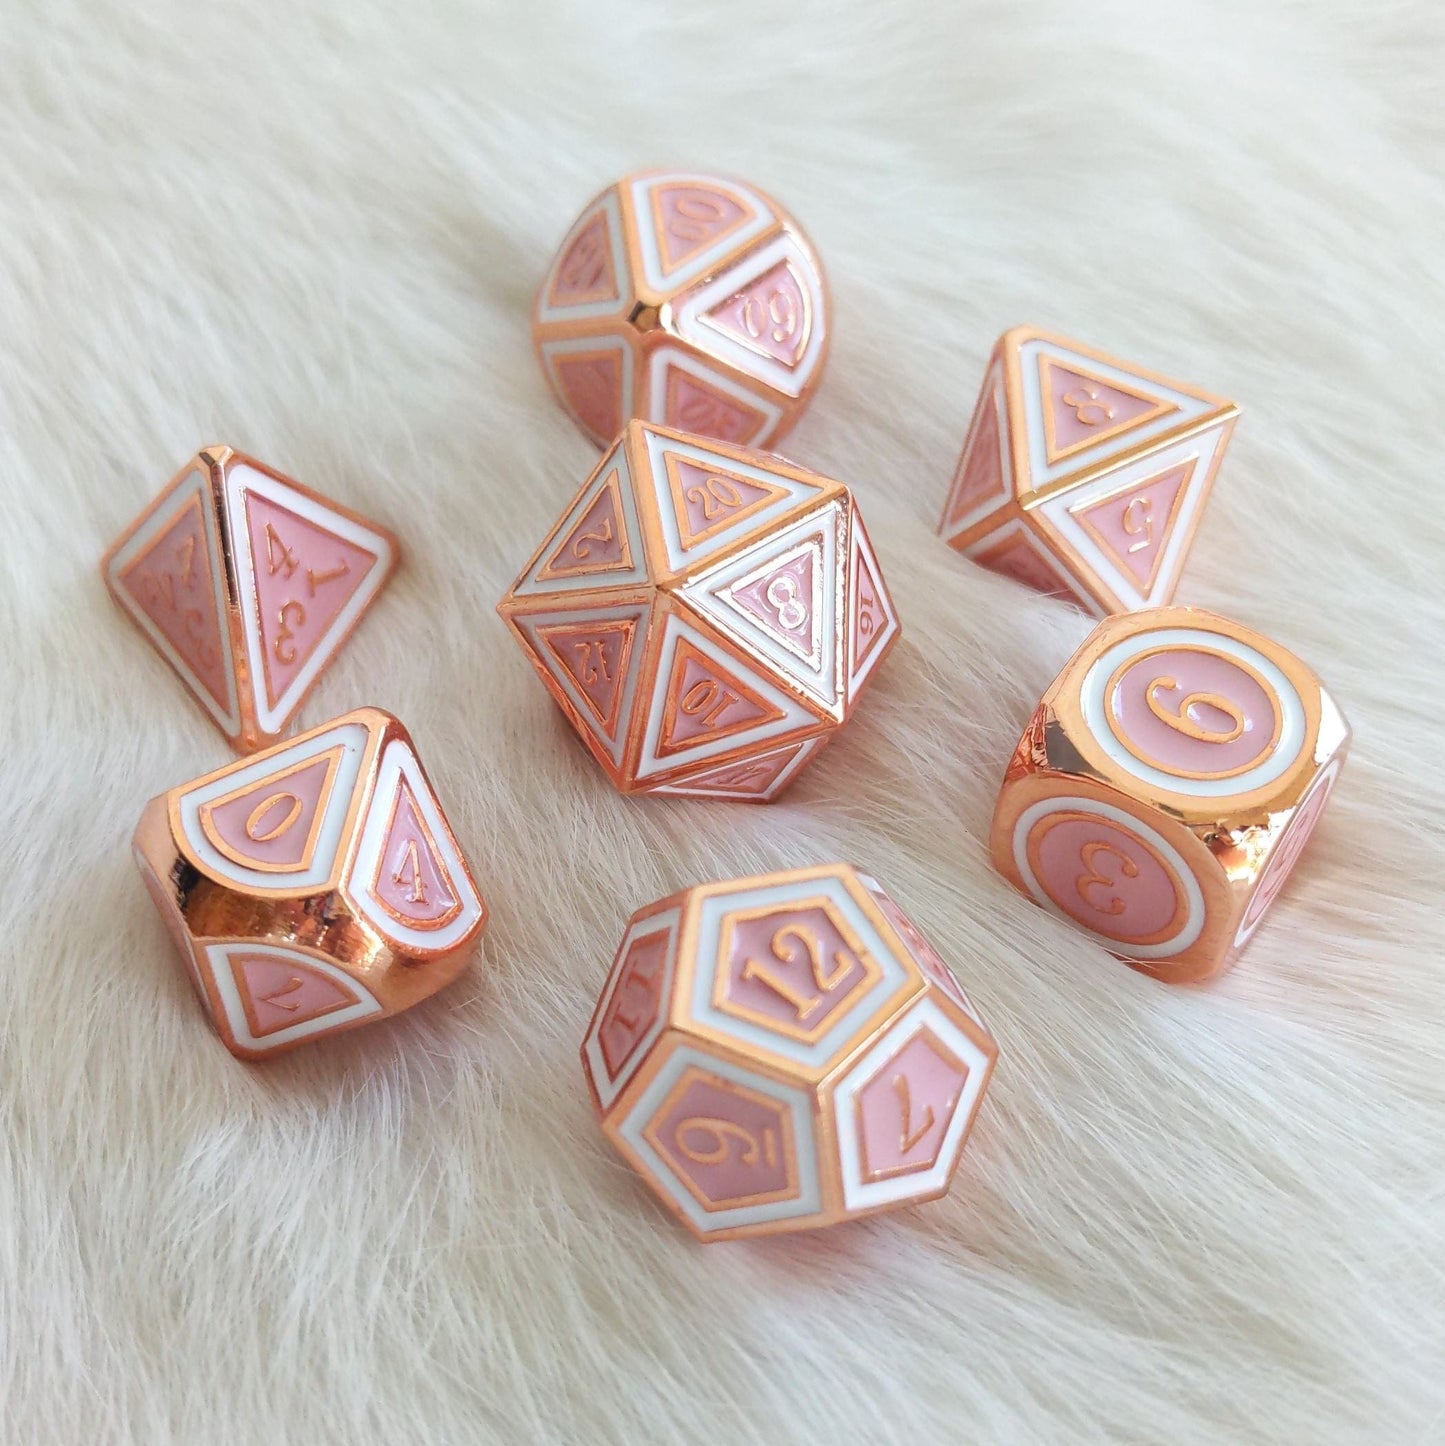 Ostara Metal Dice Set. Copper Plated Pink and White - CozyGamer